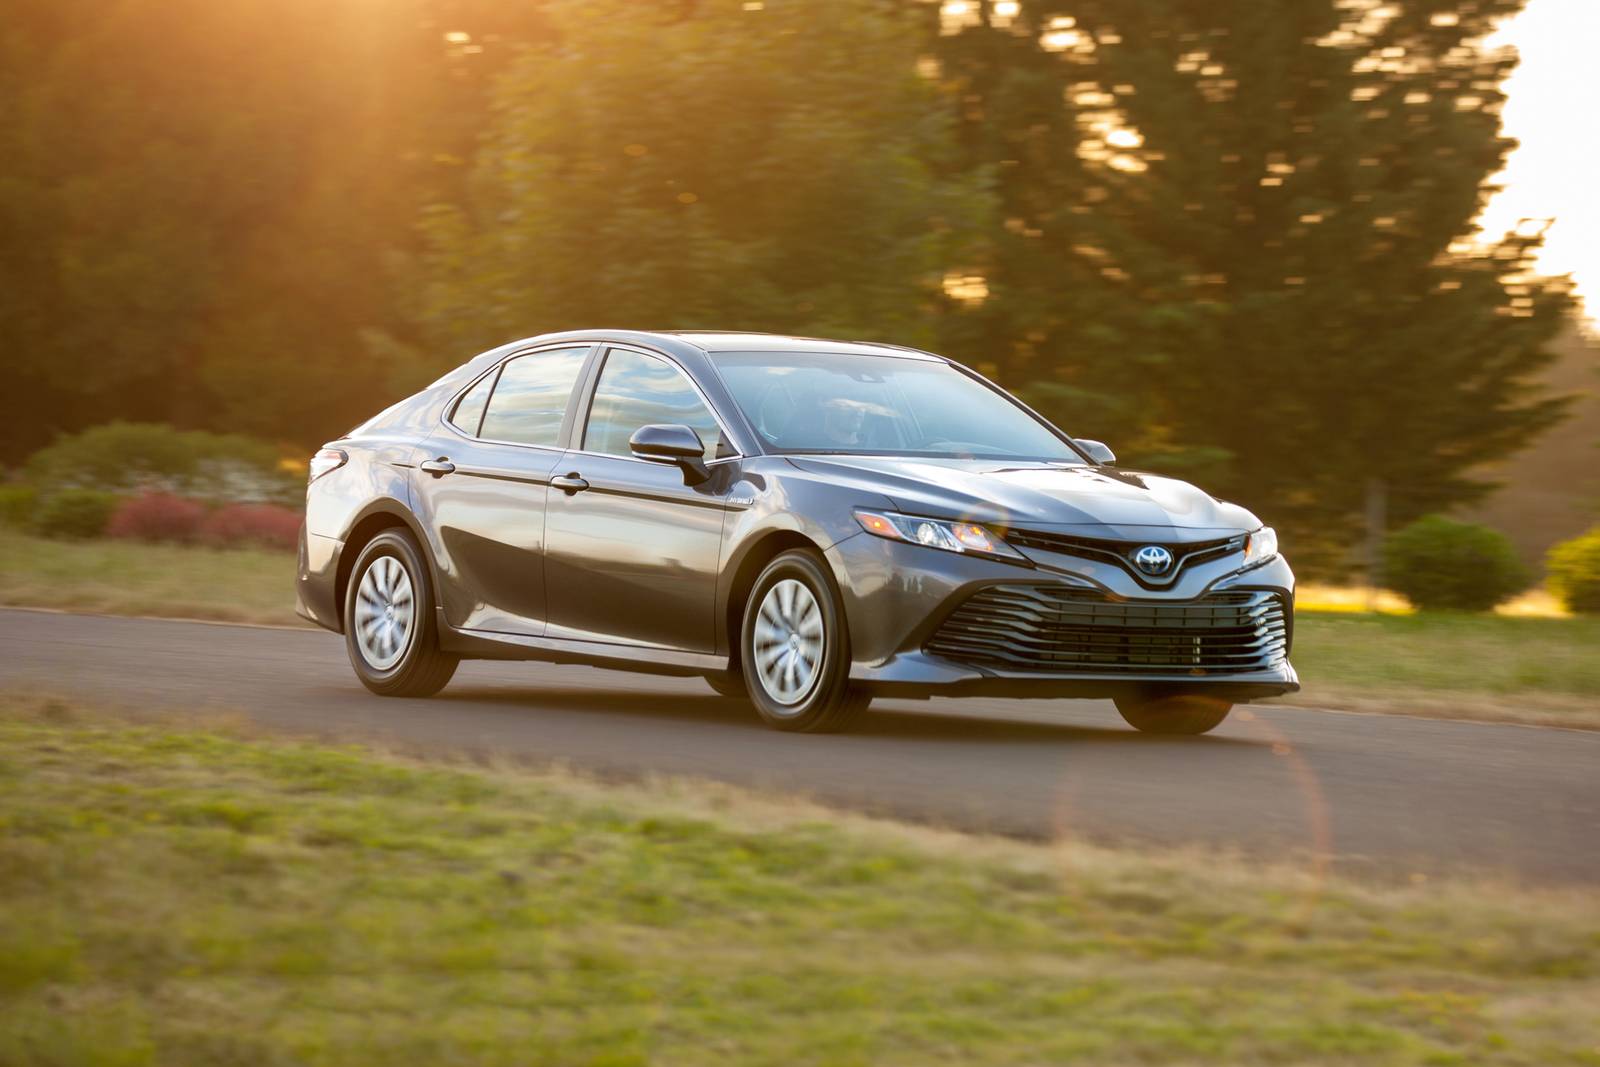 2019 Toyota Camry Hybrid Review & Ratings | Edmunds